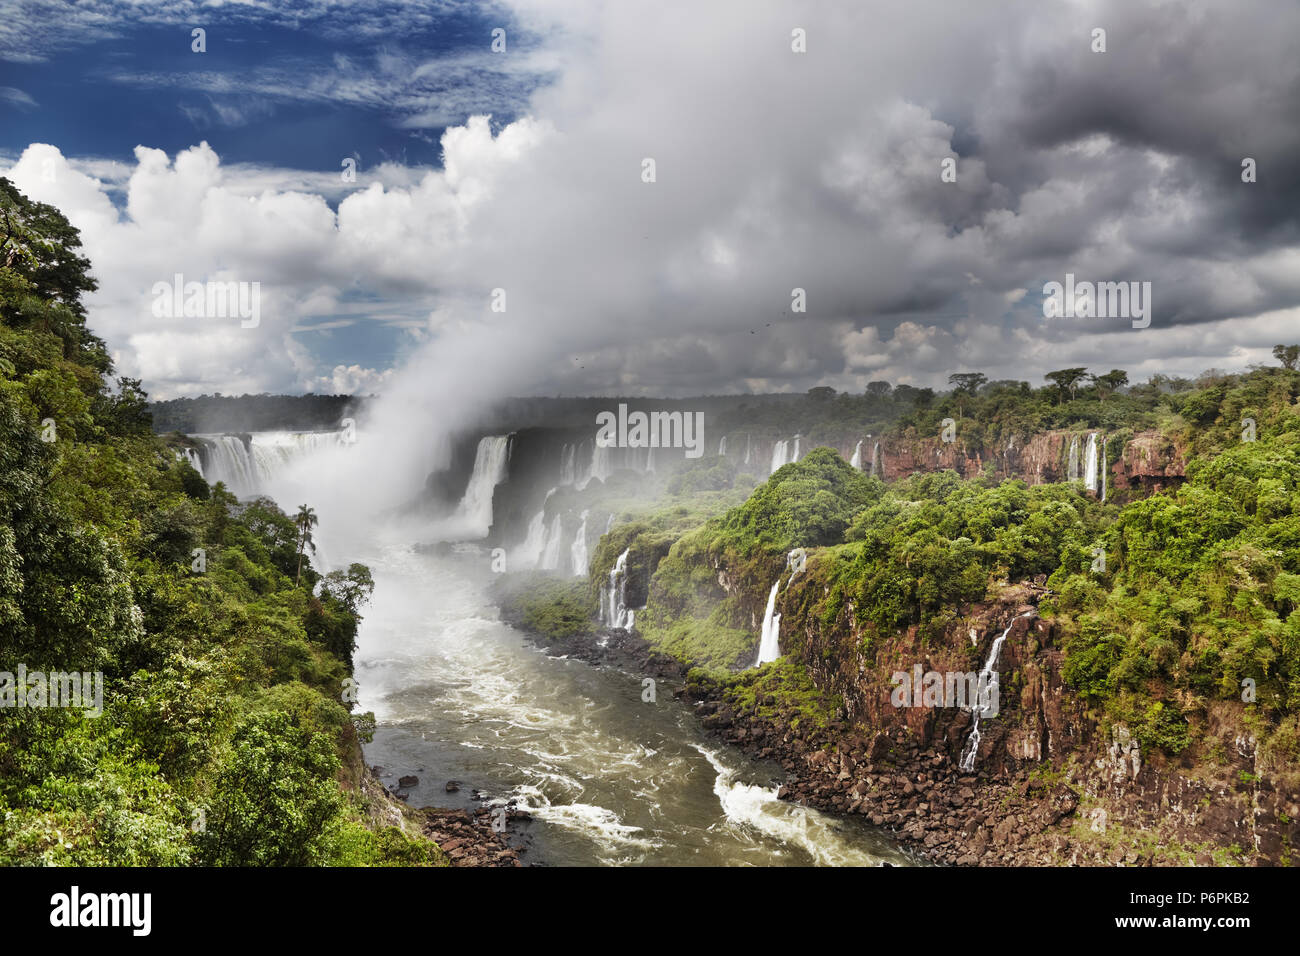 Iguassu Falls, the largest series of waterfalls of the world, located at the Brazilian and Argentinian border, View from Brazilian side Stock Photo